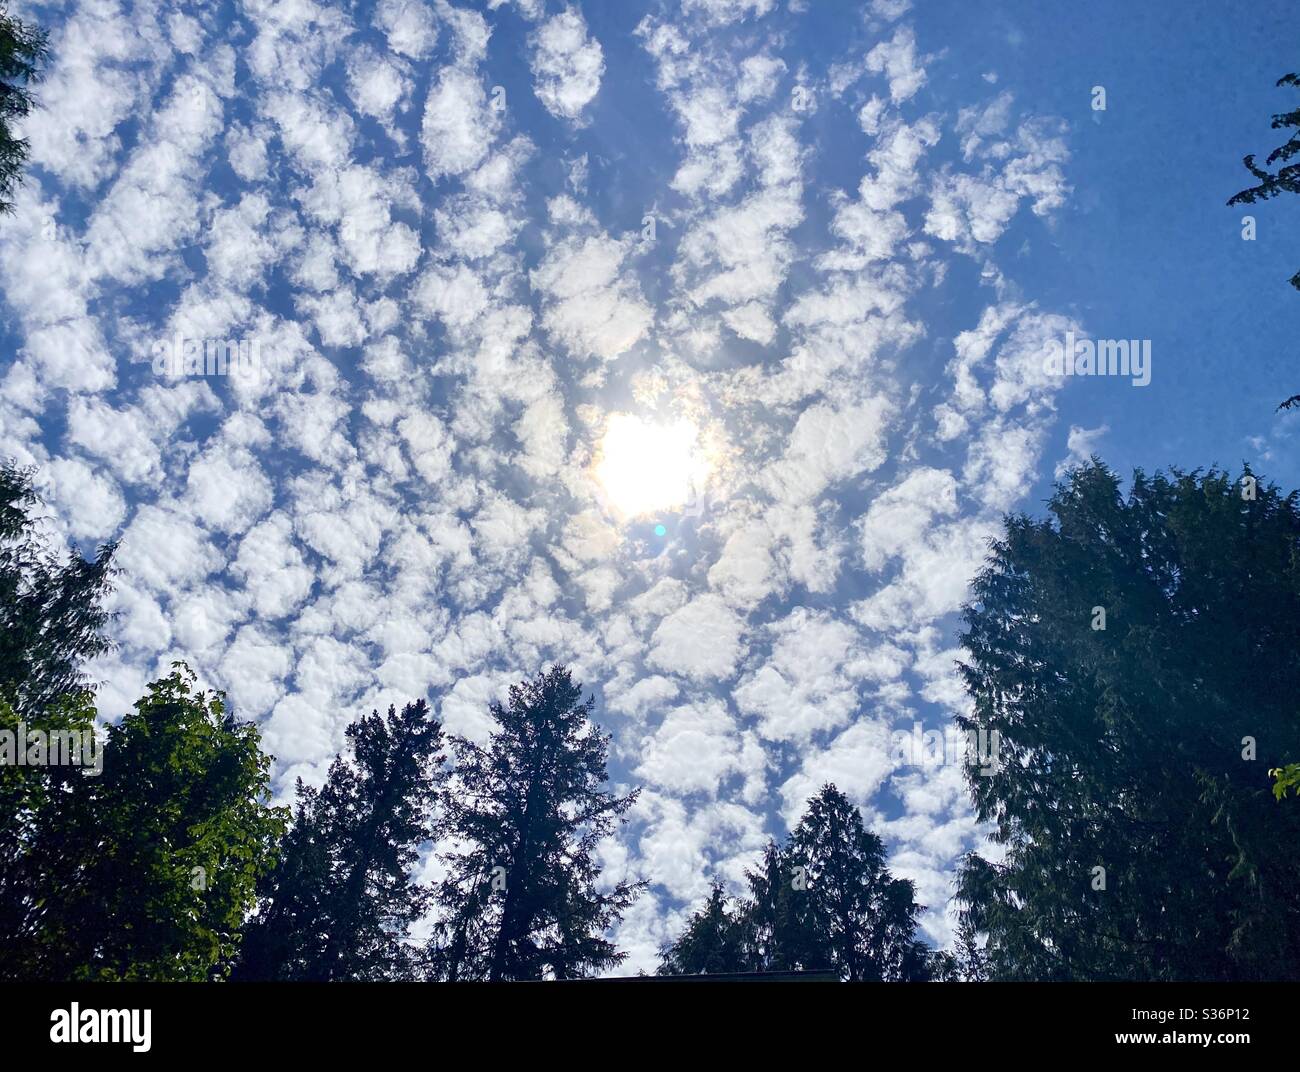 Looking up to sun, clouds, and blue sky through the pine trees. Stock Photo